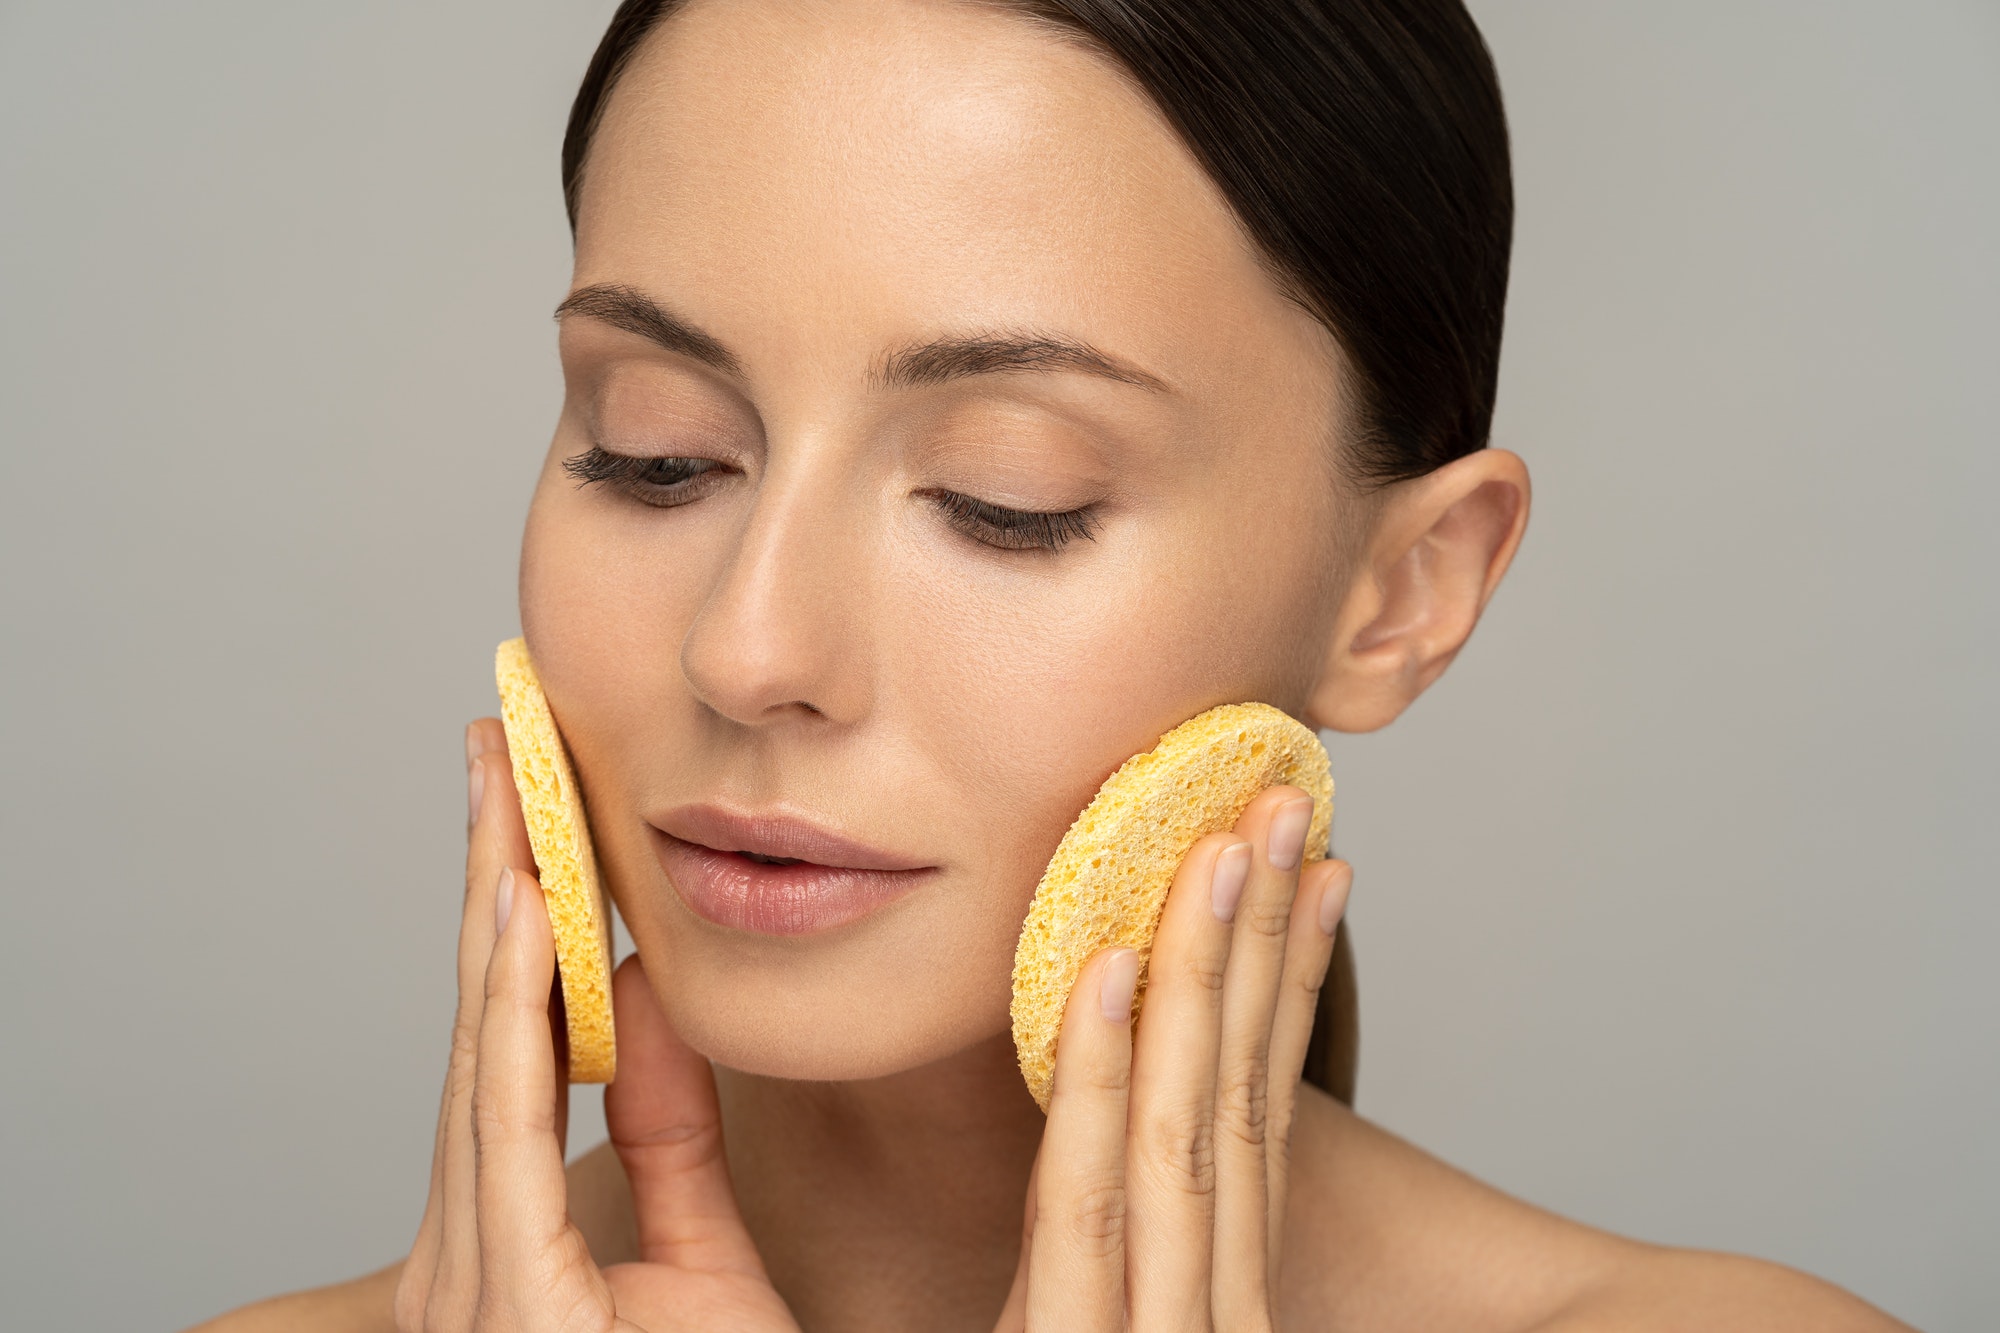 Young woman with nude make-up and naked shoulders cleaning her face with exfoliating sponge isolated